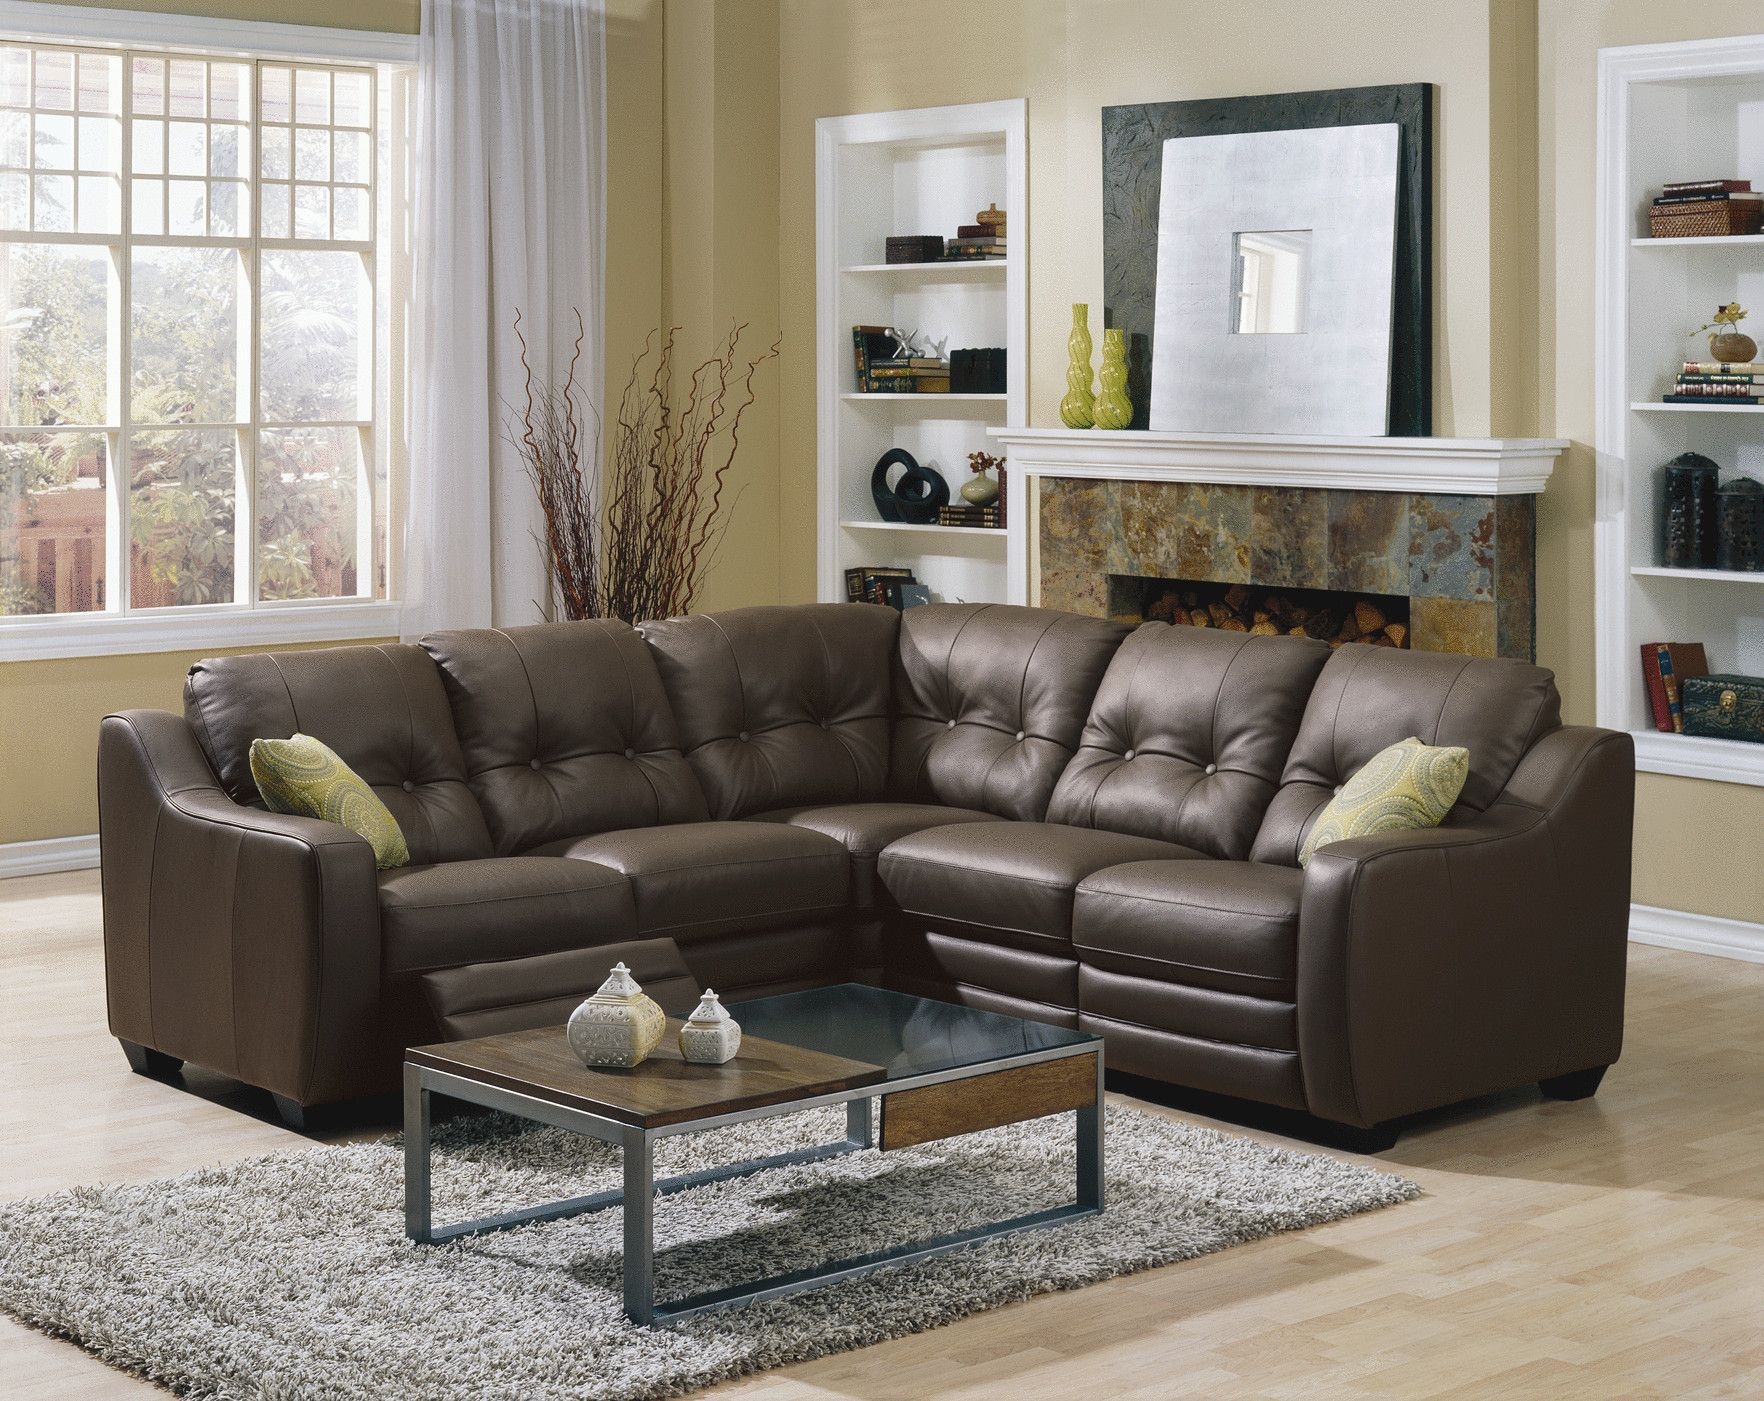 Small Sectional Sofa With Recliner, Leather Sectional With Recliner